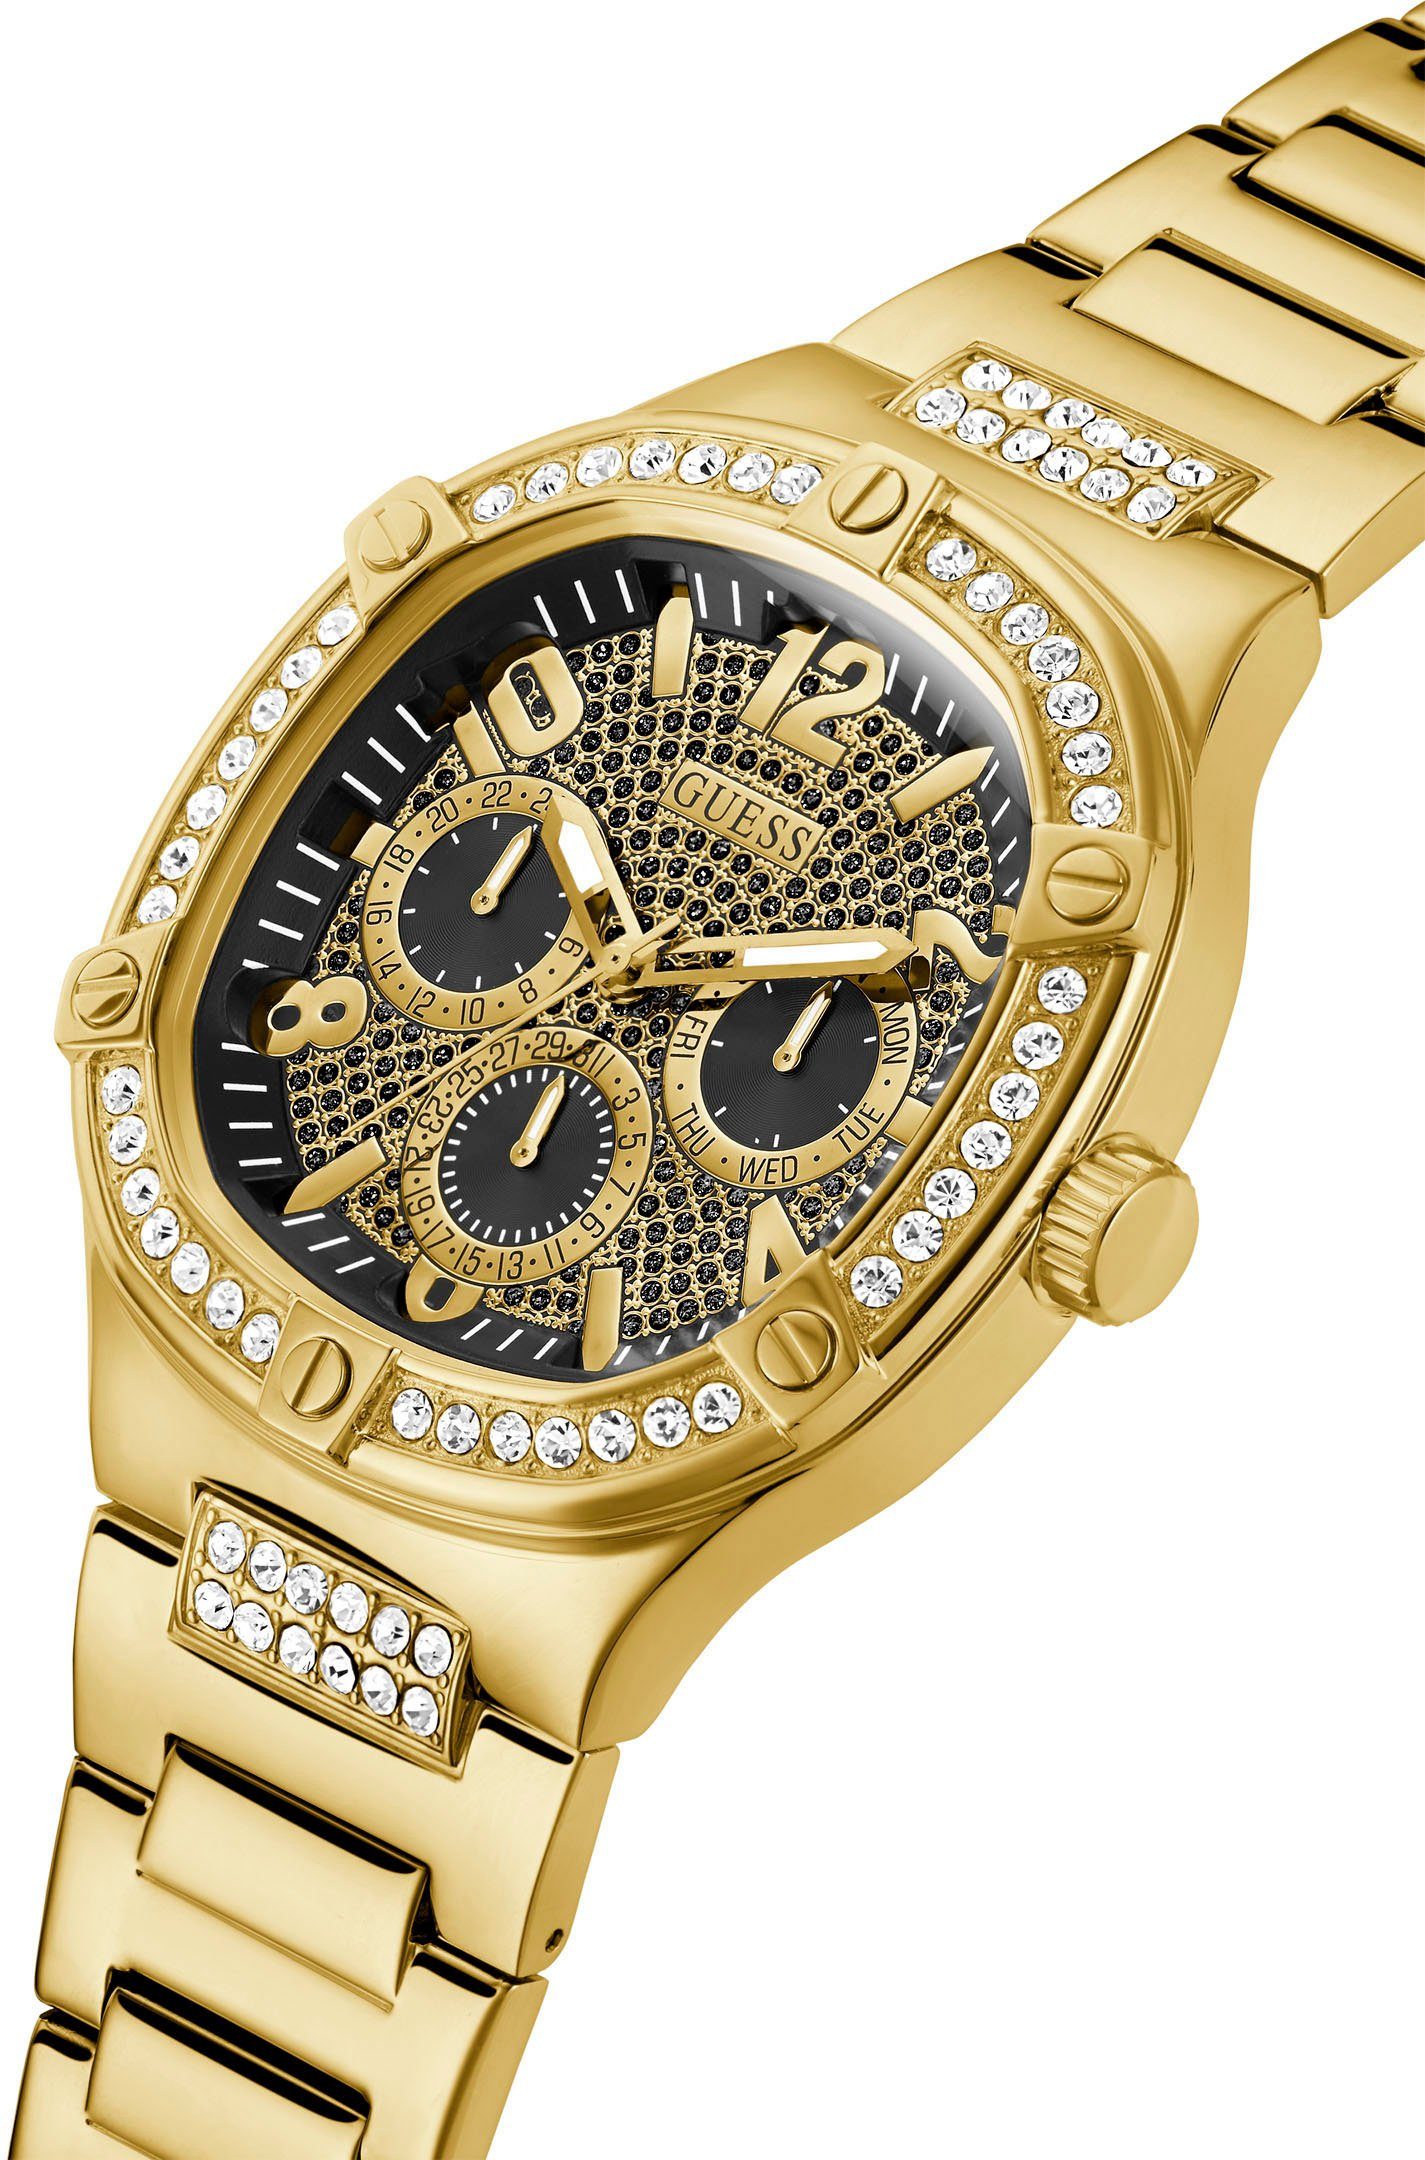 Guess Multifunktionsuhr GW0576G2